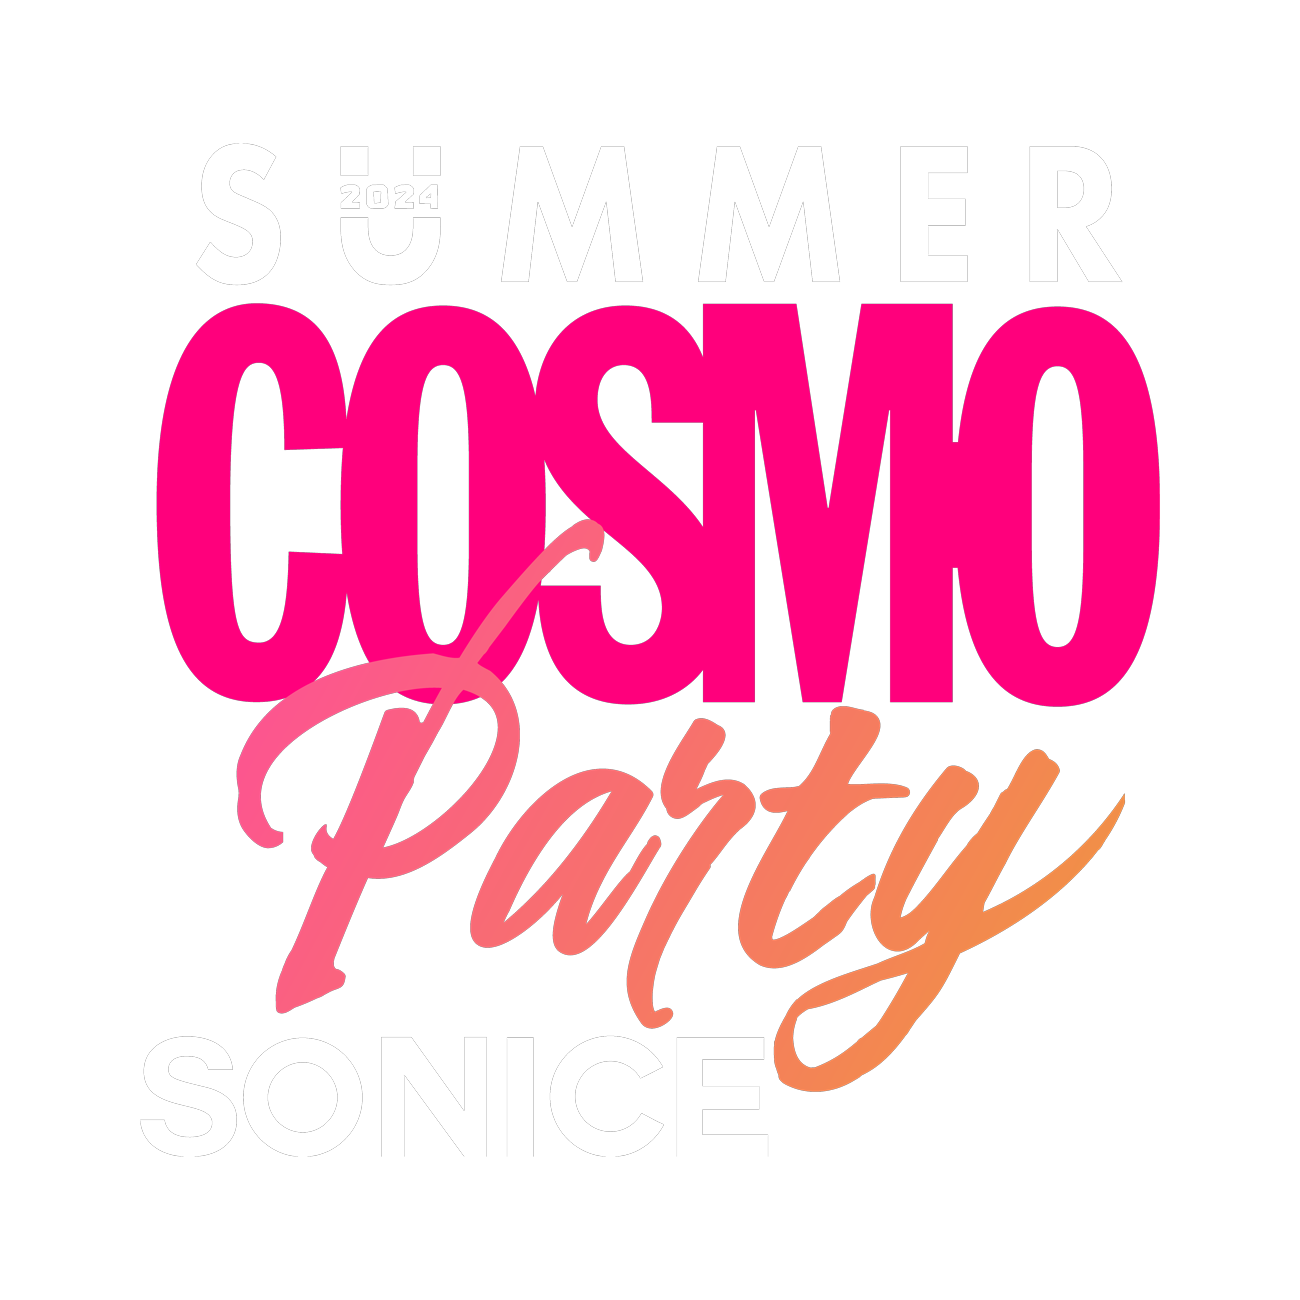 cosmo 2024 summerparty sonice